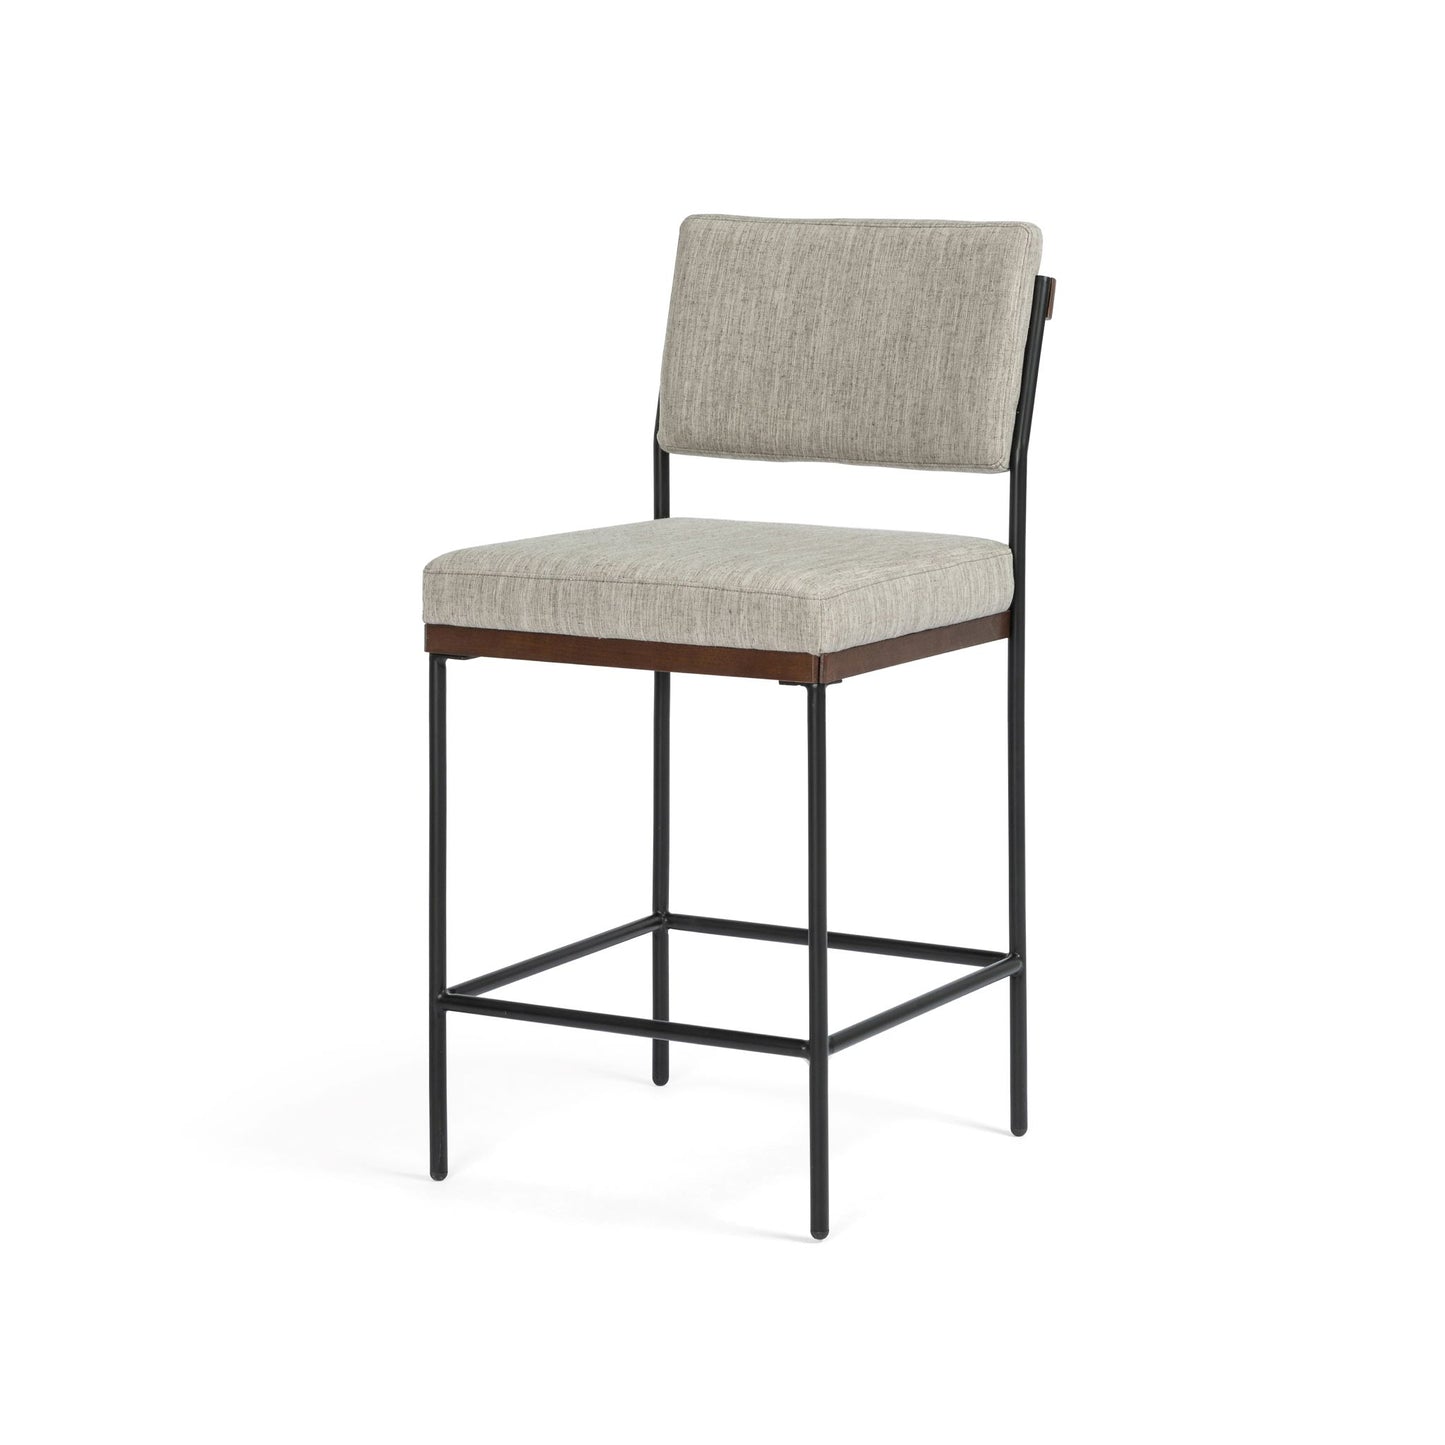 Load image into Gallery viewer, Benton Bar + Counter Stools CounterBar &amp;amp; Counter Stools Four Hands  Counter   Four Hands, Mid Century Modern Furniture, Old Bones Furniture Company, Old Bones Co, Modern Mid Century, Designer Furniture, https://www.oldbonesco.com/
